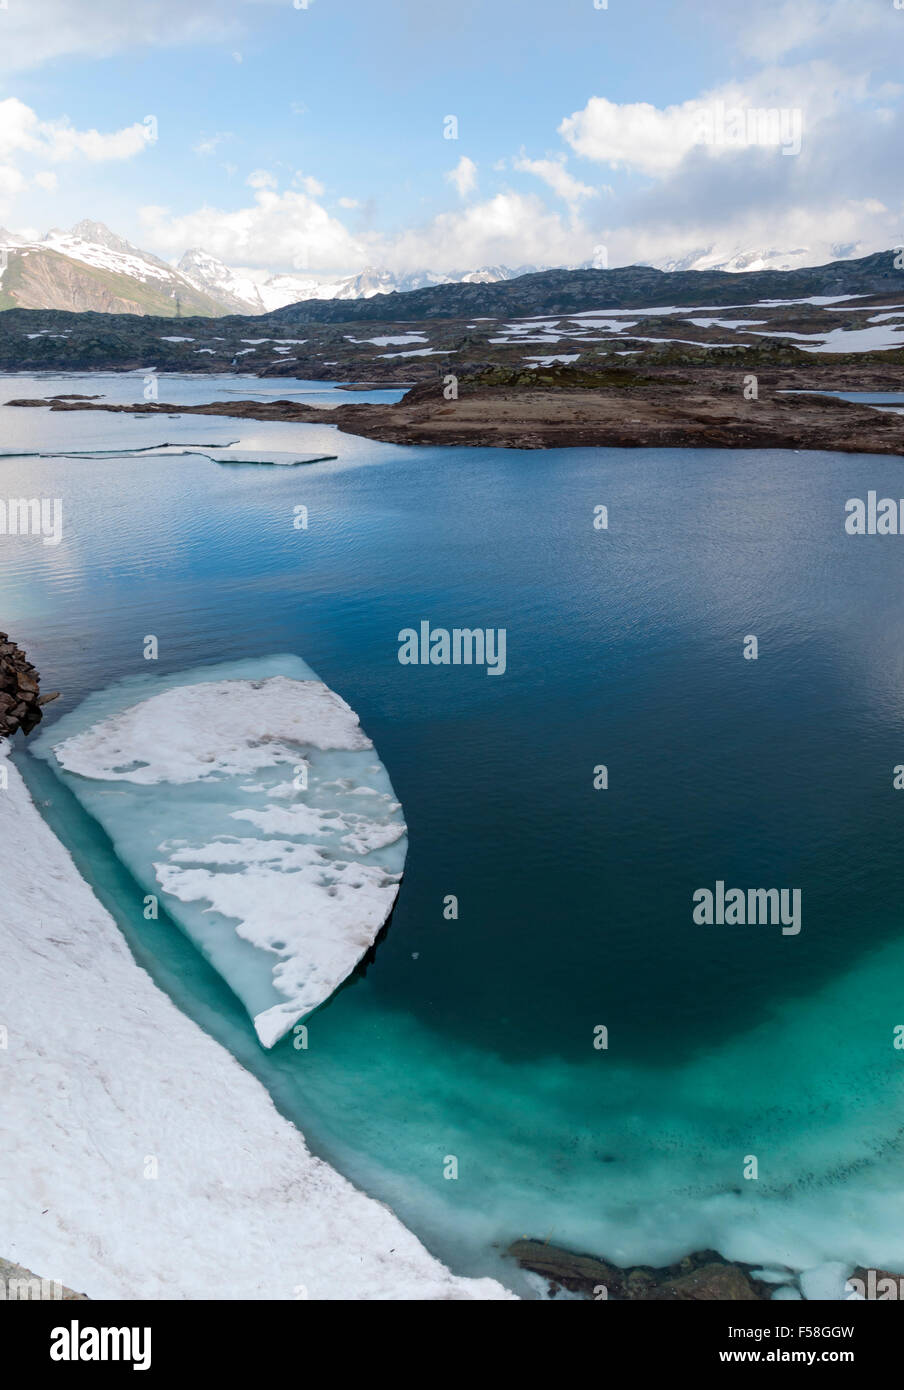 Sheet of ice are floating in the glacial lake 'Totensee' on top of the Grimsel pass, Switzerland (altitude 2165m). Stock Photo